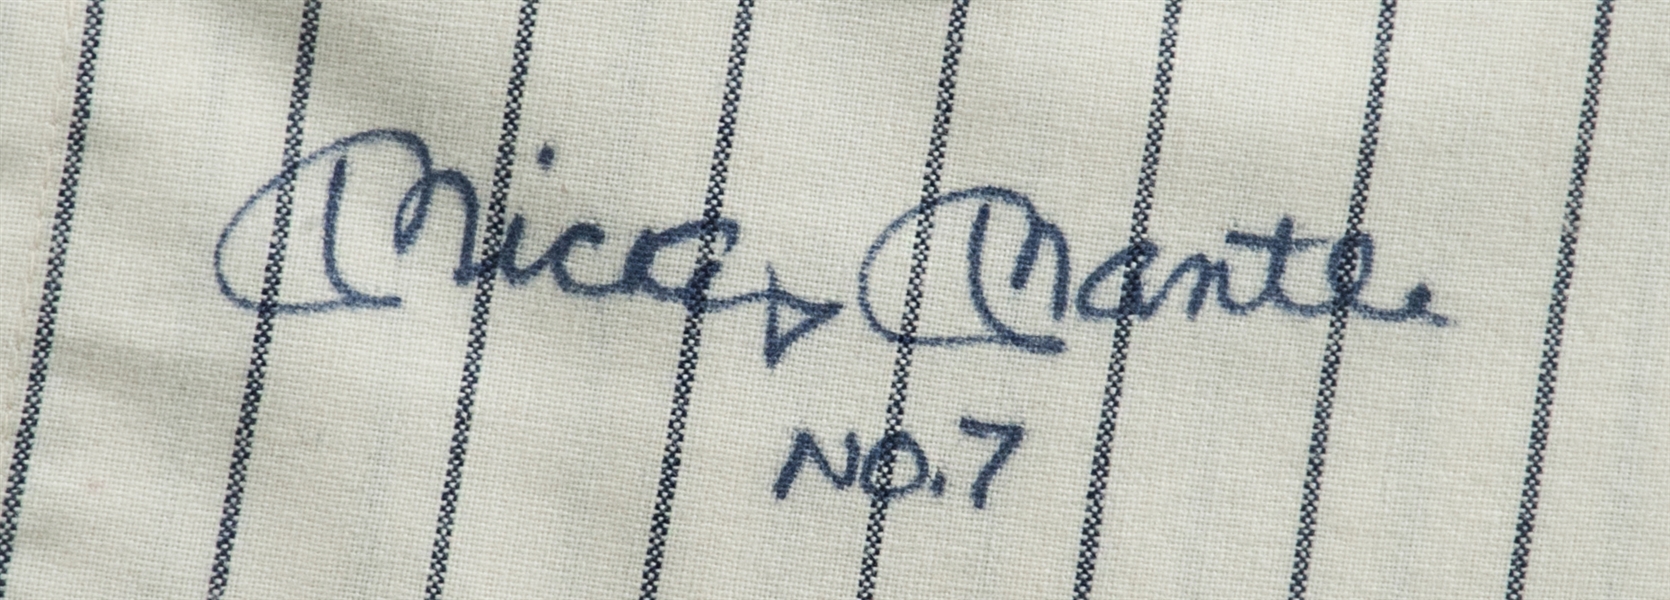 Beautiful Mickey Mantle No. 7 Signed Vintage New York Yankees Flannel Jersey  PSA